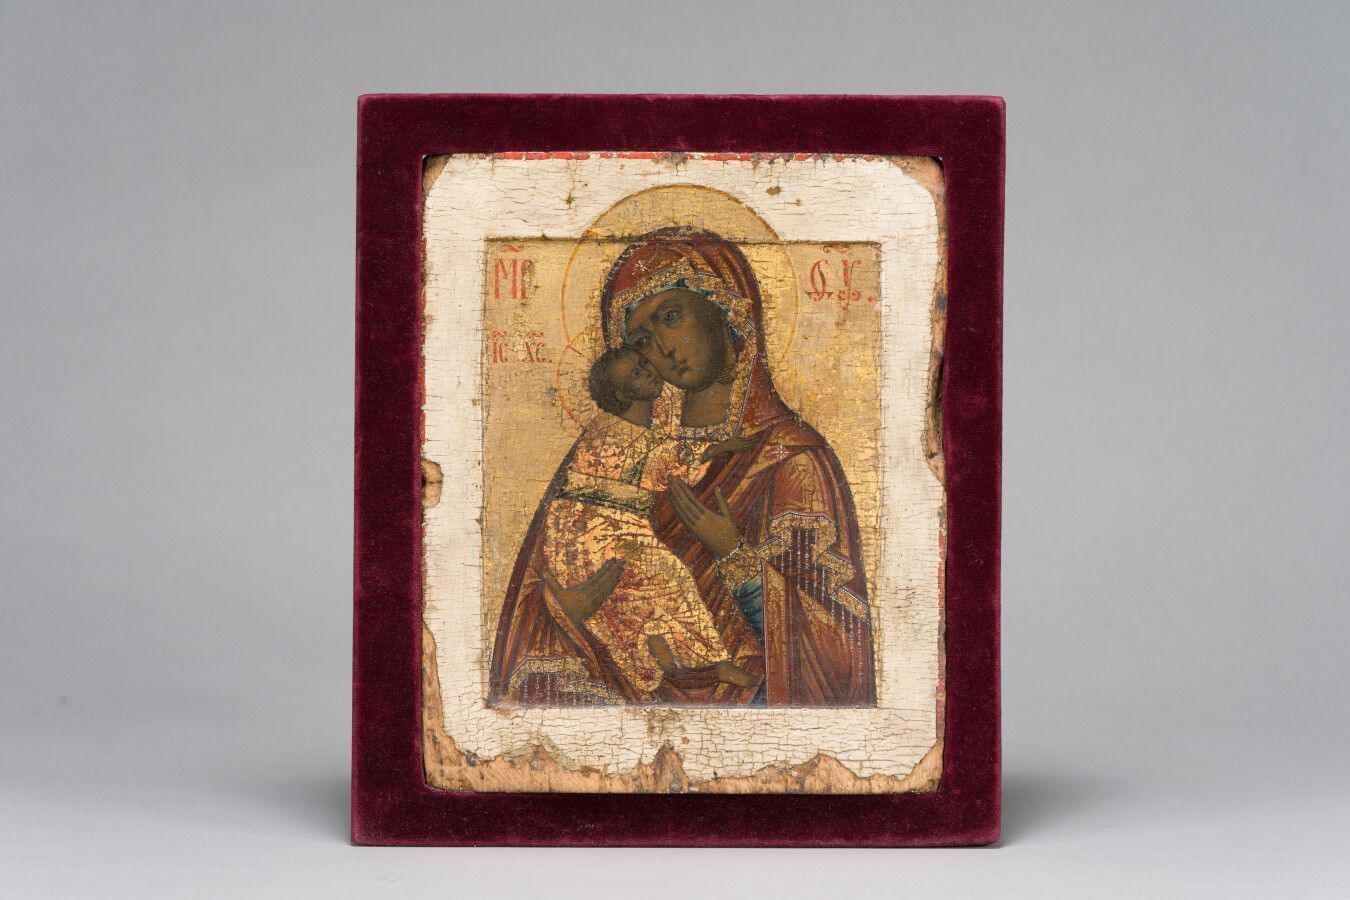 Null 18. The Virgin of Vladimir

Russian icon (Central Russia), 18th century

Te&hellip;